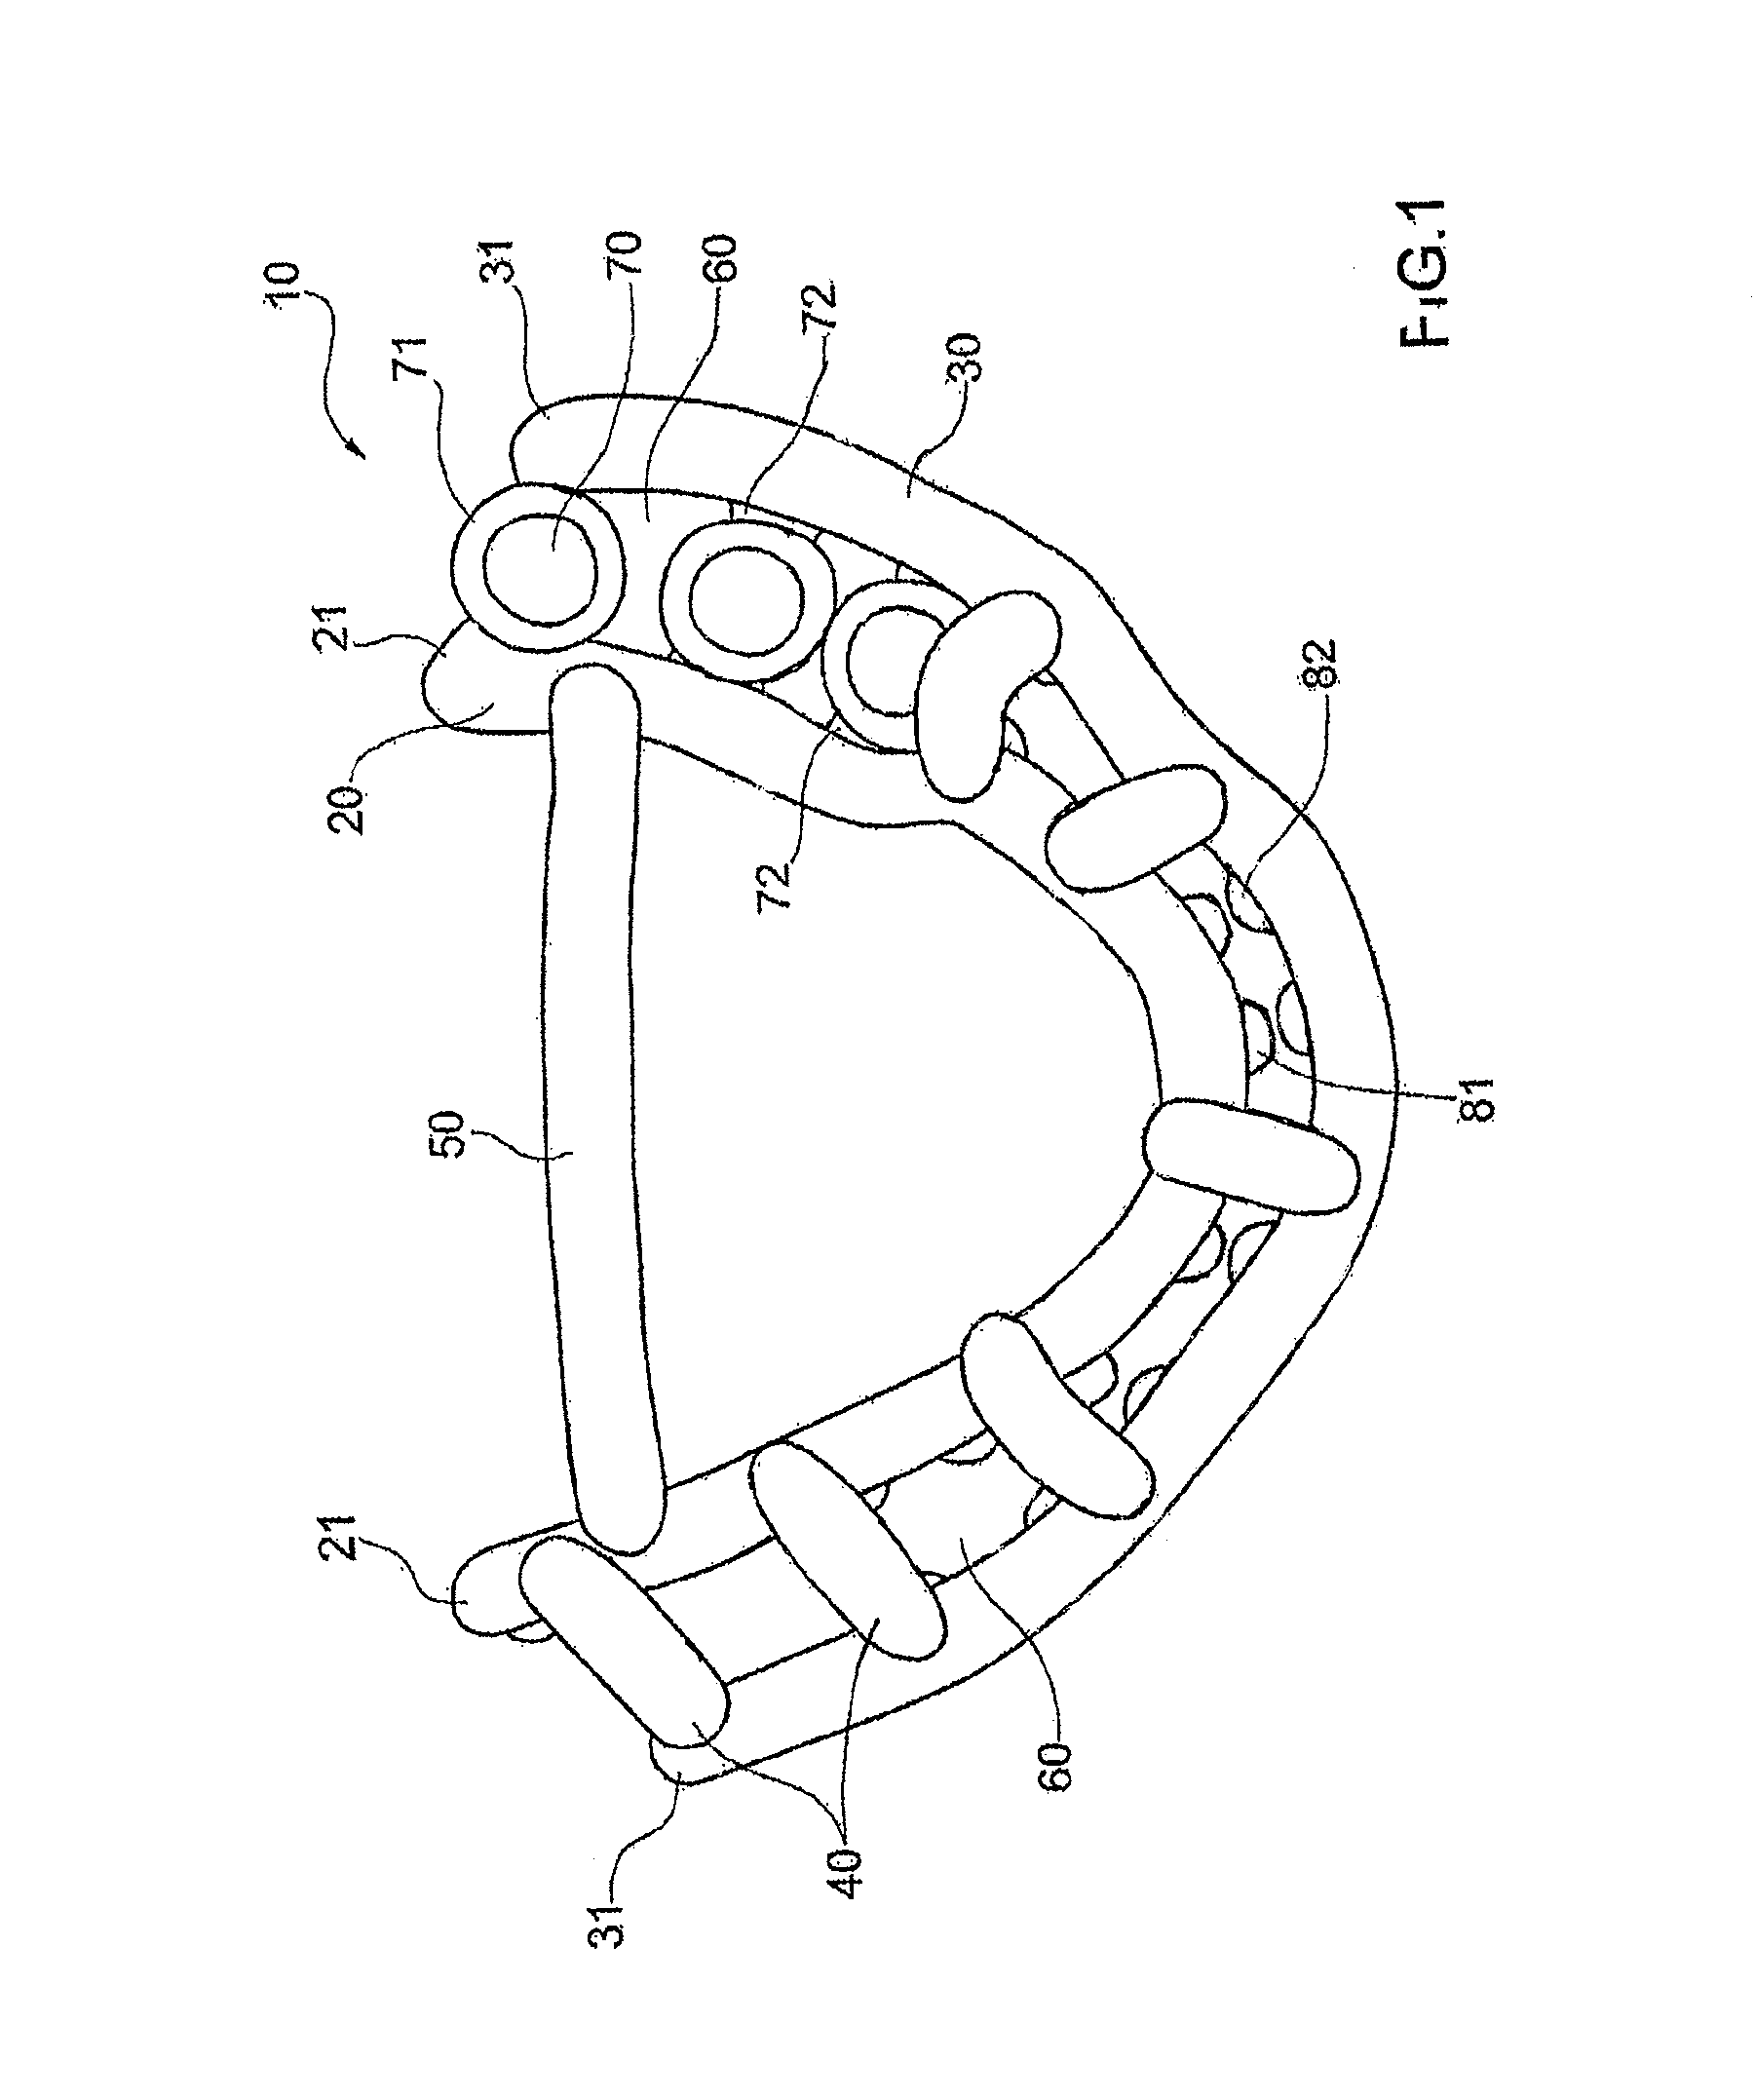 Surgical template for performing dental implantology